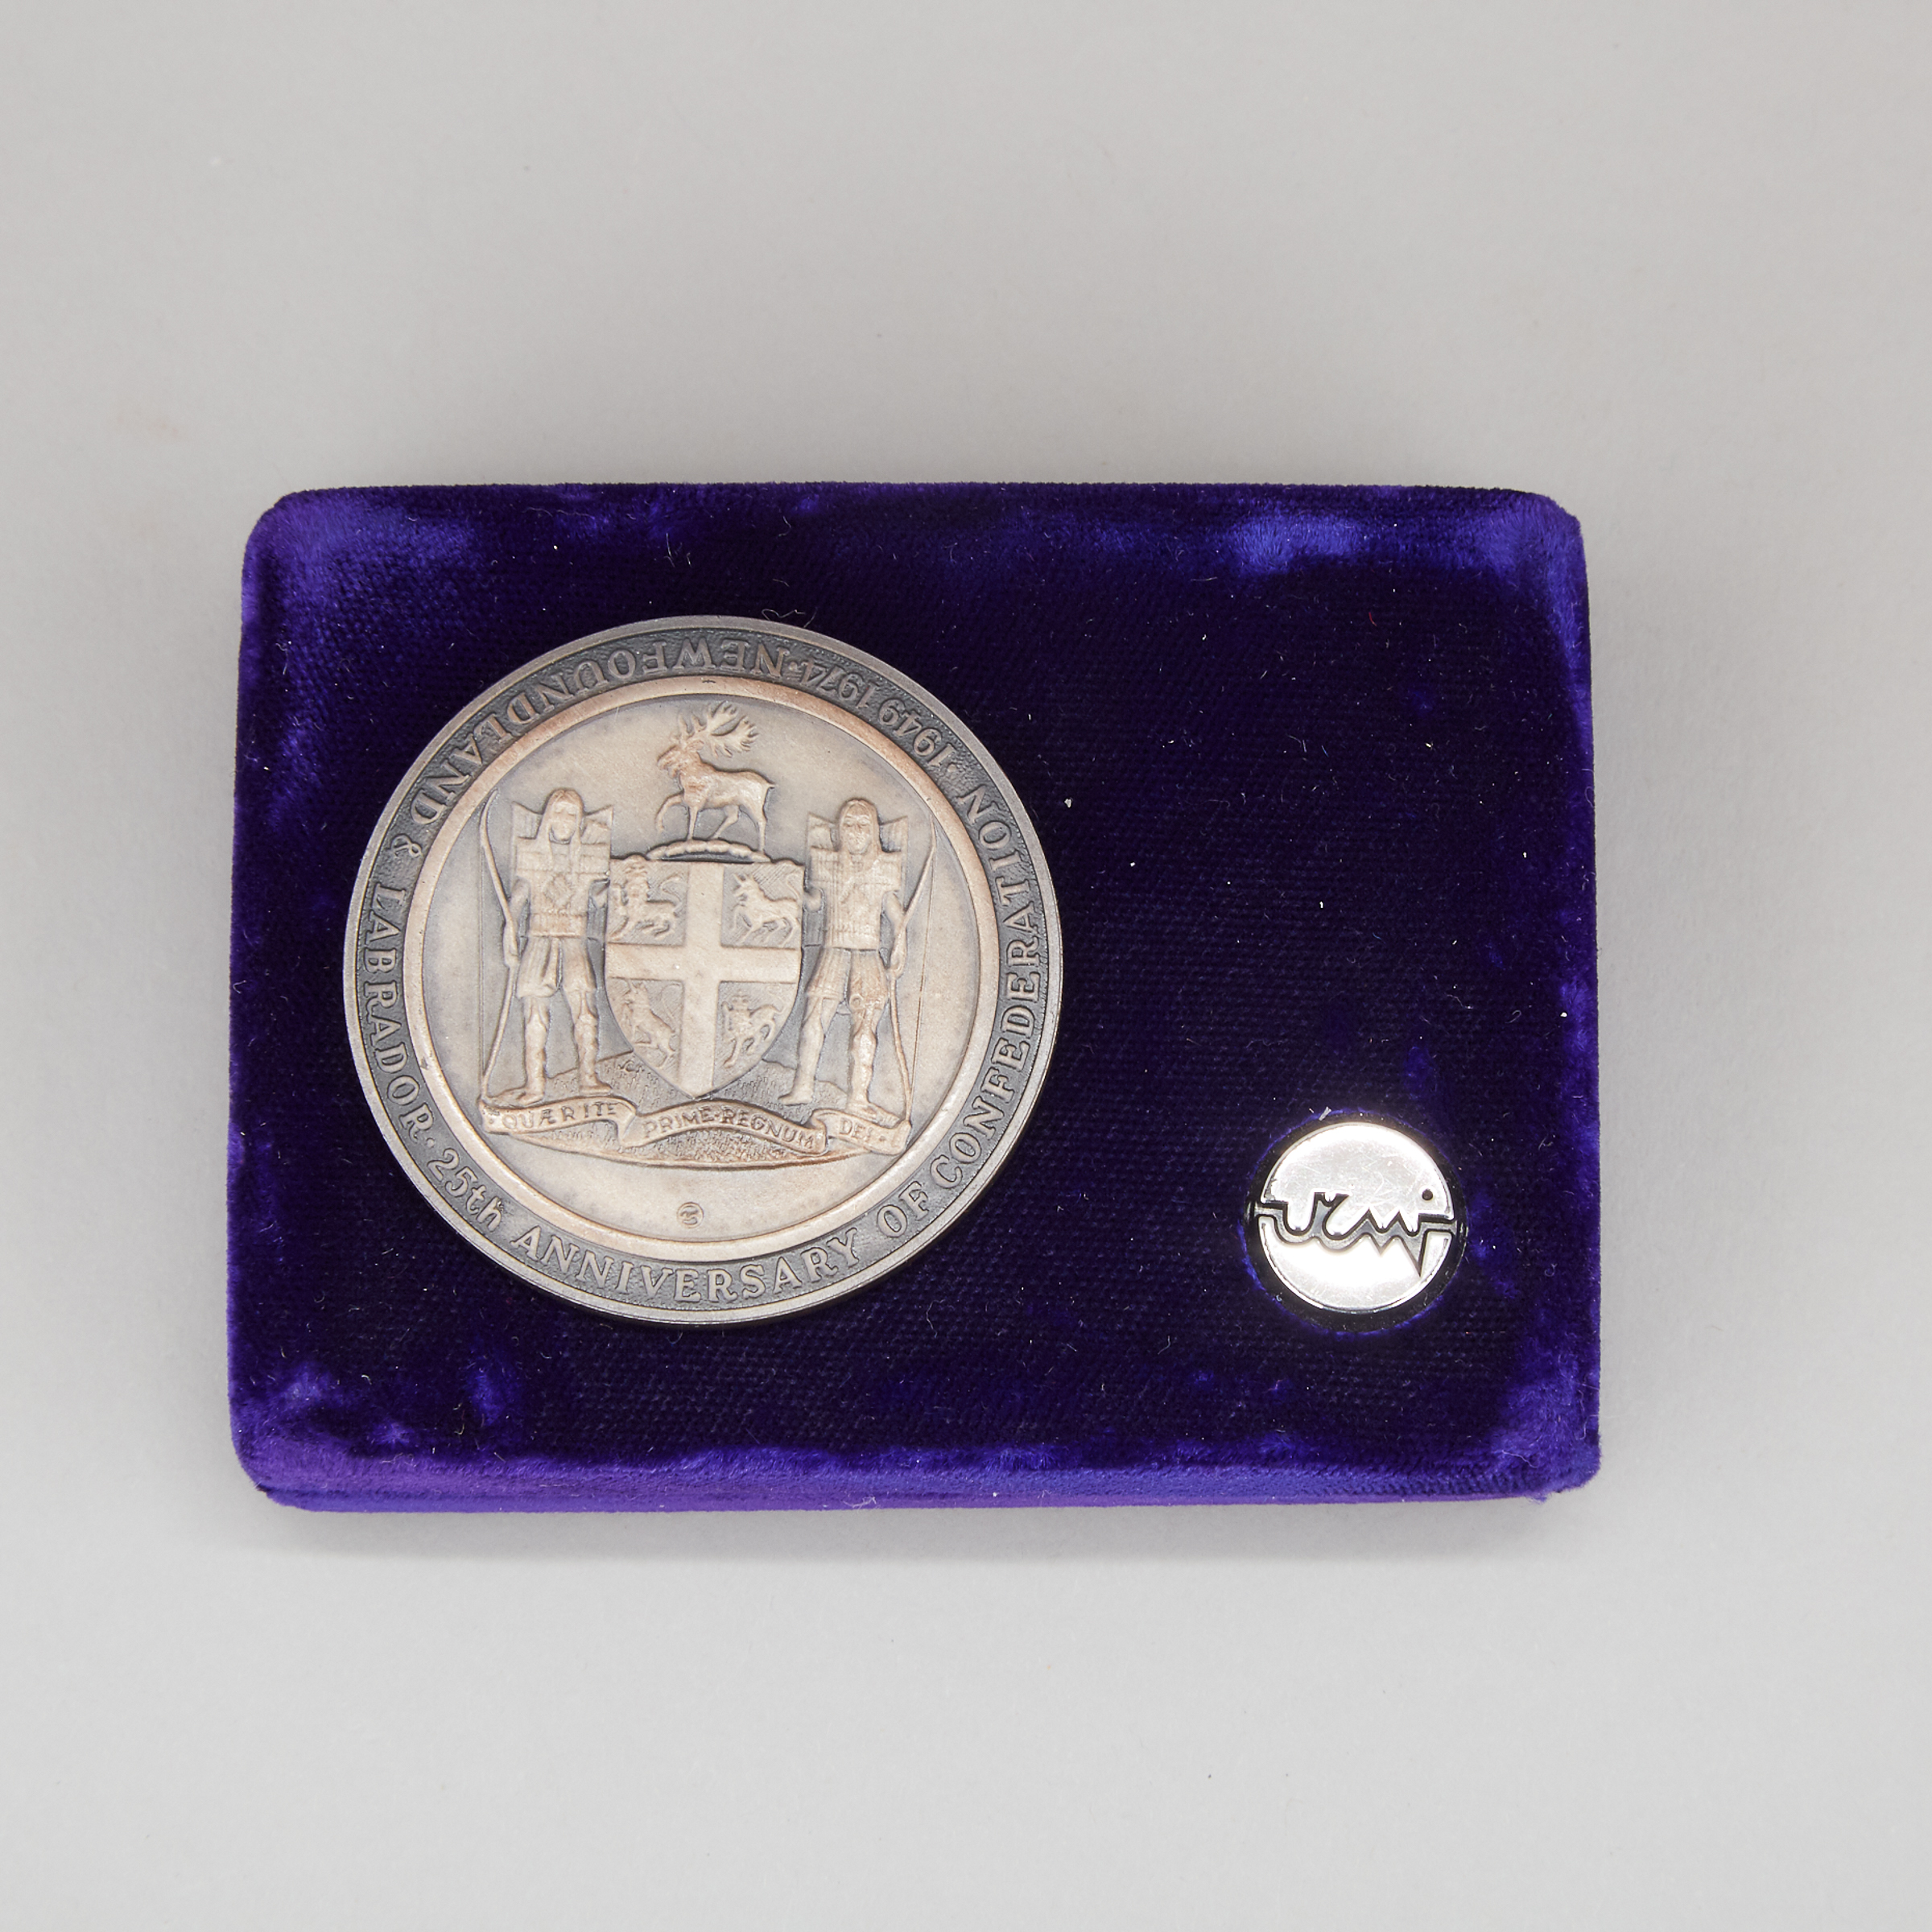 Silver Medallion Commemorating Newfoundland's 25th Anniversary in the Confederation, 1974